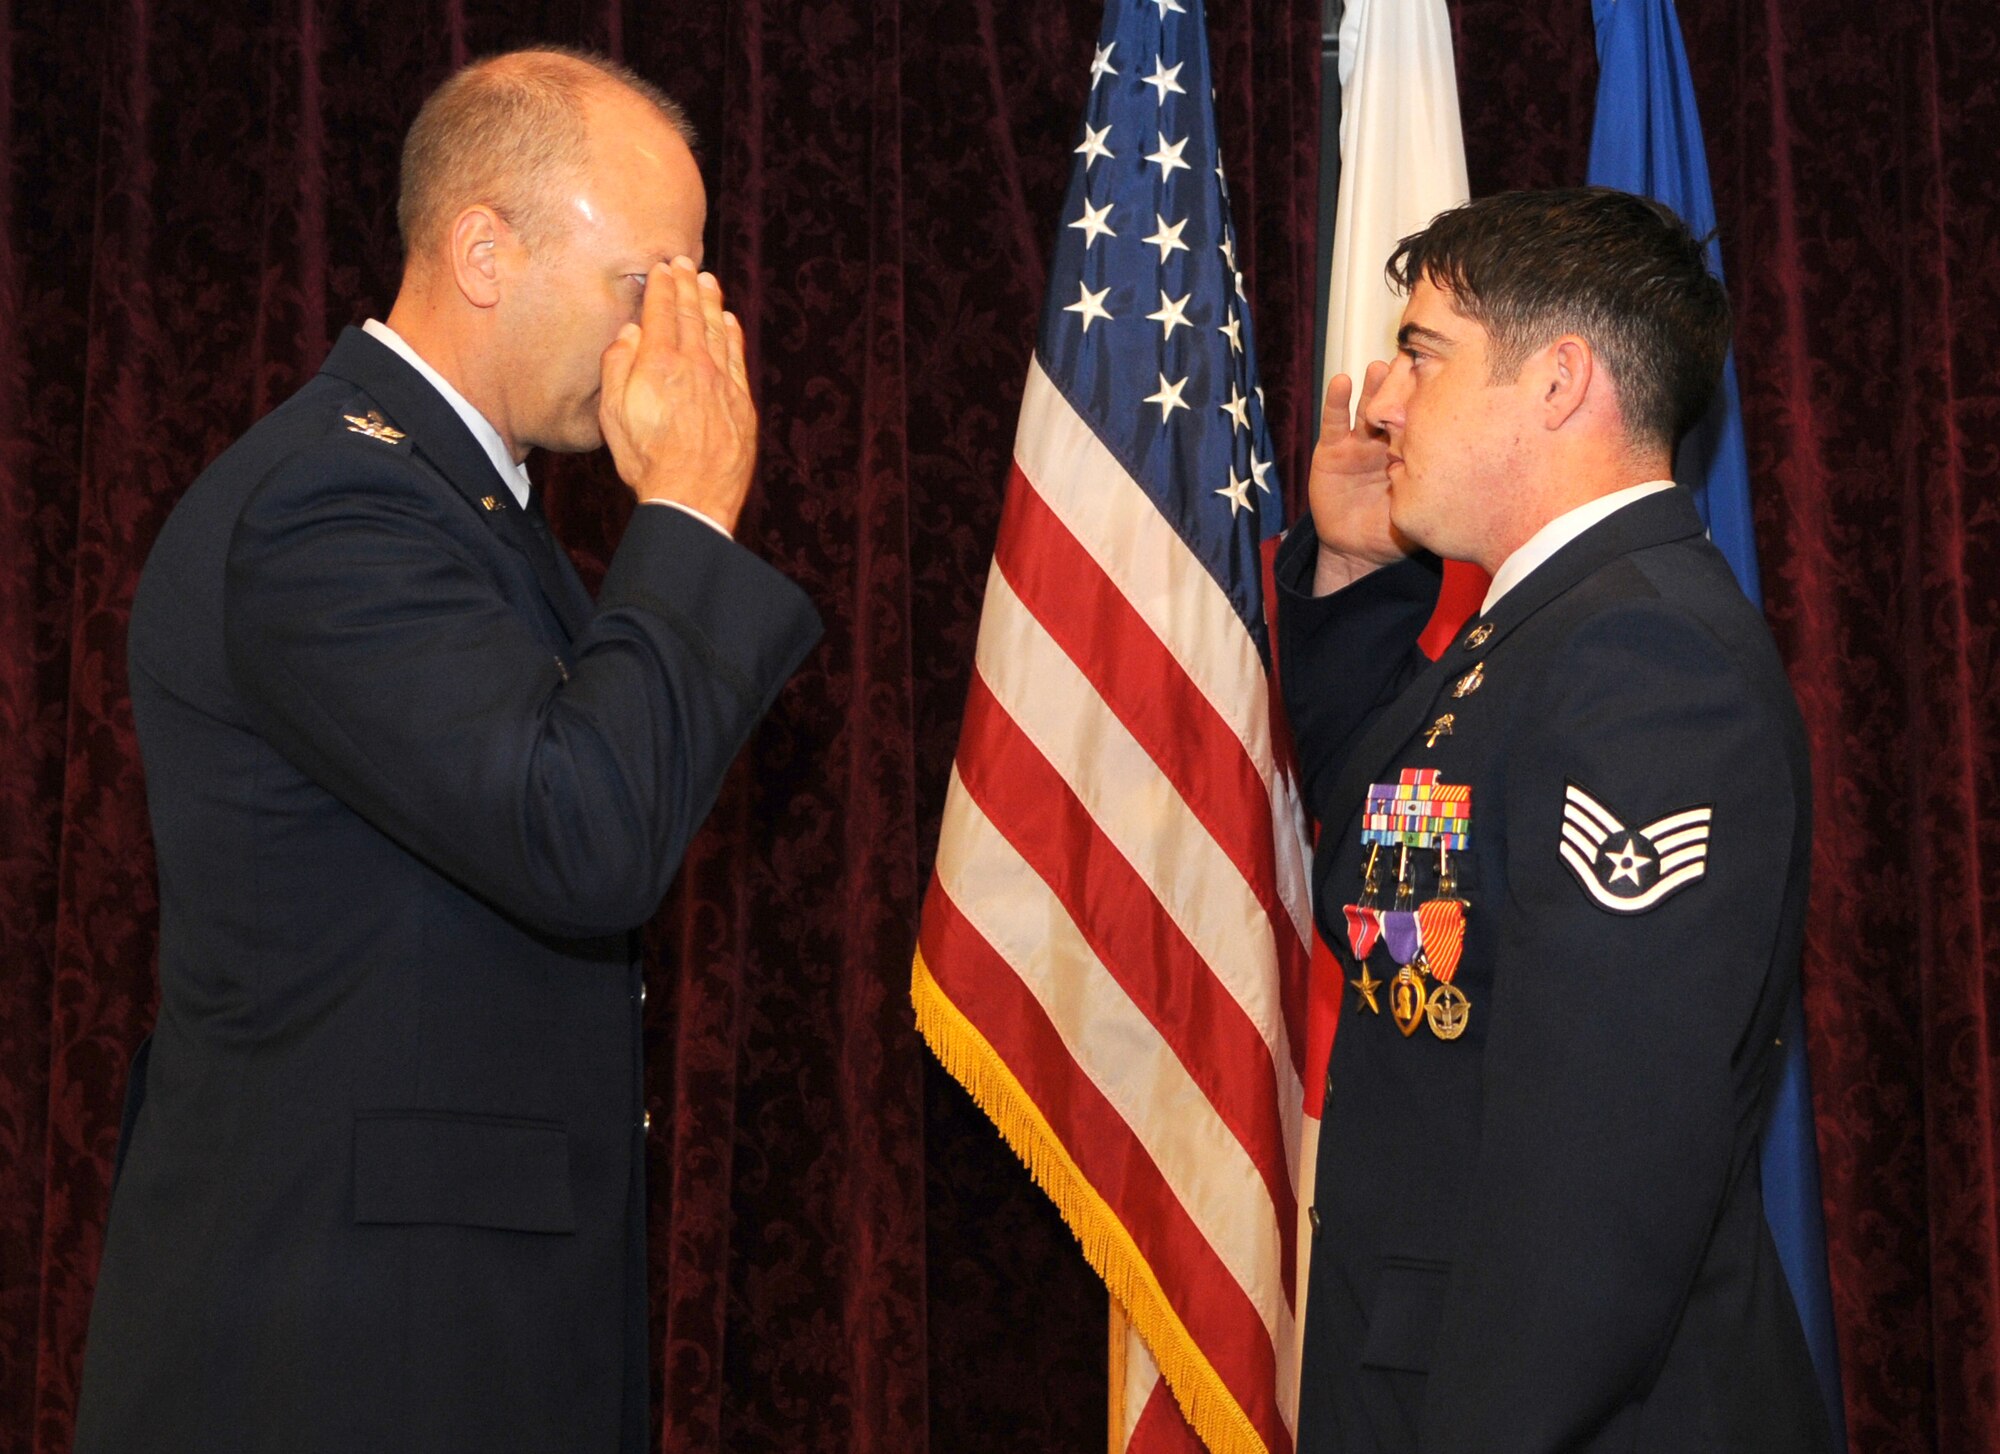 KADENA AIR BASE, Japan -- Staff Sgt. Jeremy King (right), a combat controller with the 320th Special Tactics Squadron, salutes Col. Robert Toth, the 353rd Special Operations Group commander, after receiving the Bronze Star, Purple Heart and Air Force Combat Action medals during a ceremony here April 16. Sergeant King earned the medals while deployed supporting operations in Afghanistan. (Photo by Tech. Sgt. Aaron Cram)